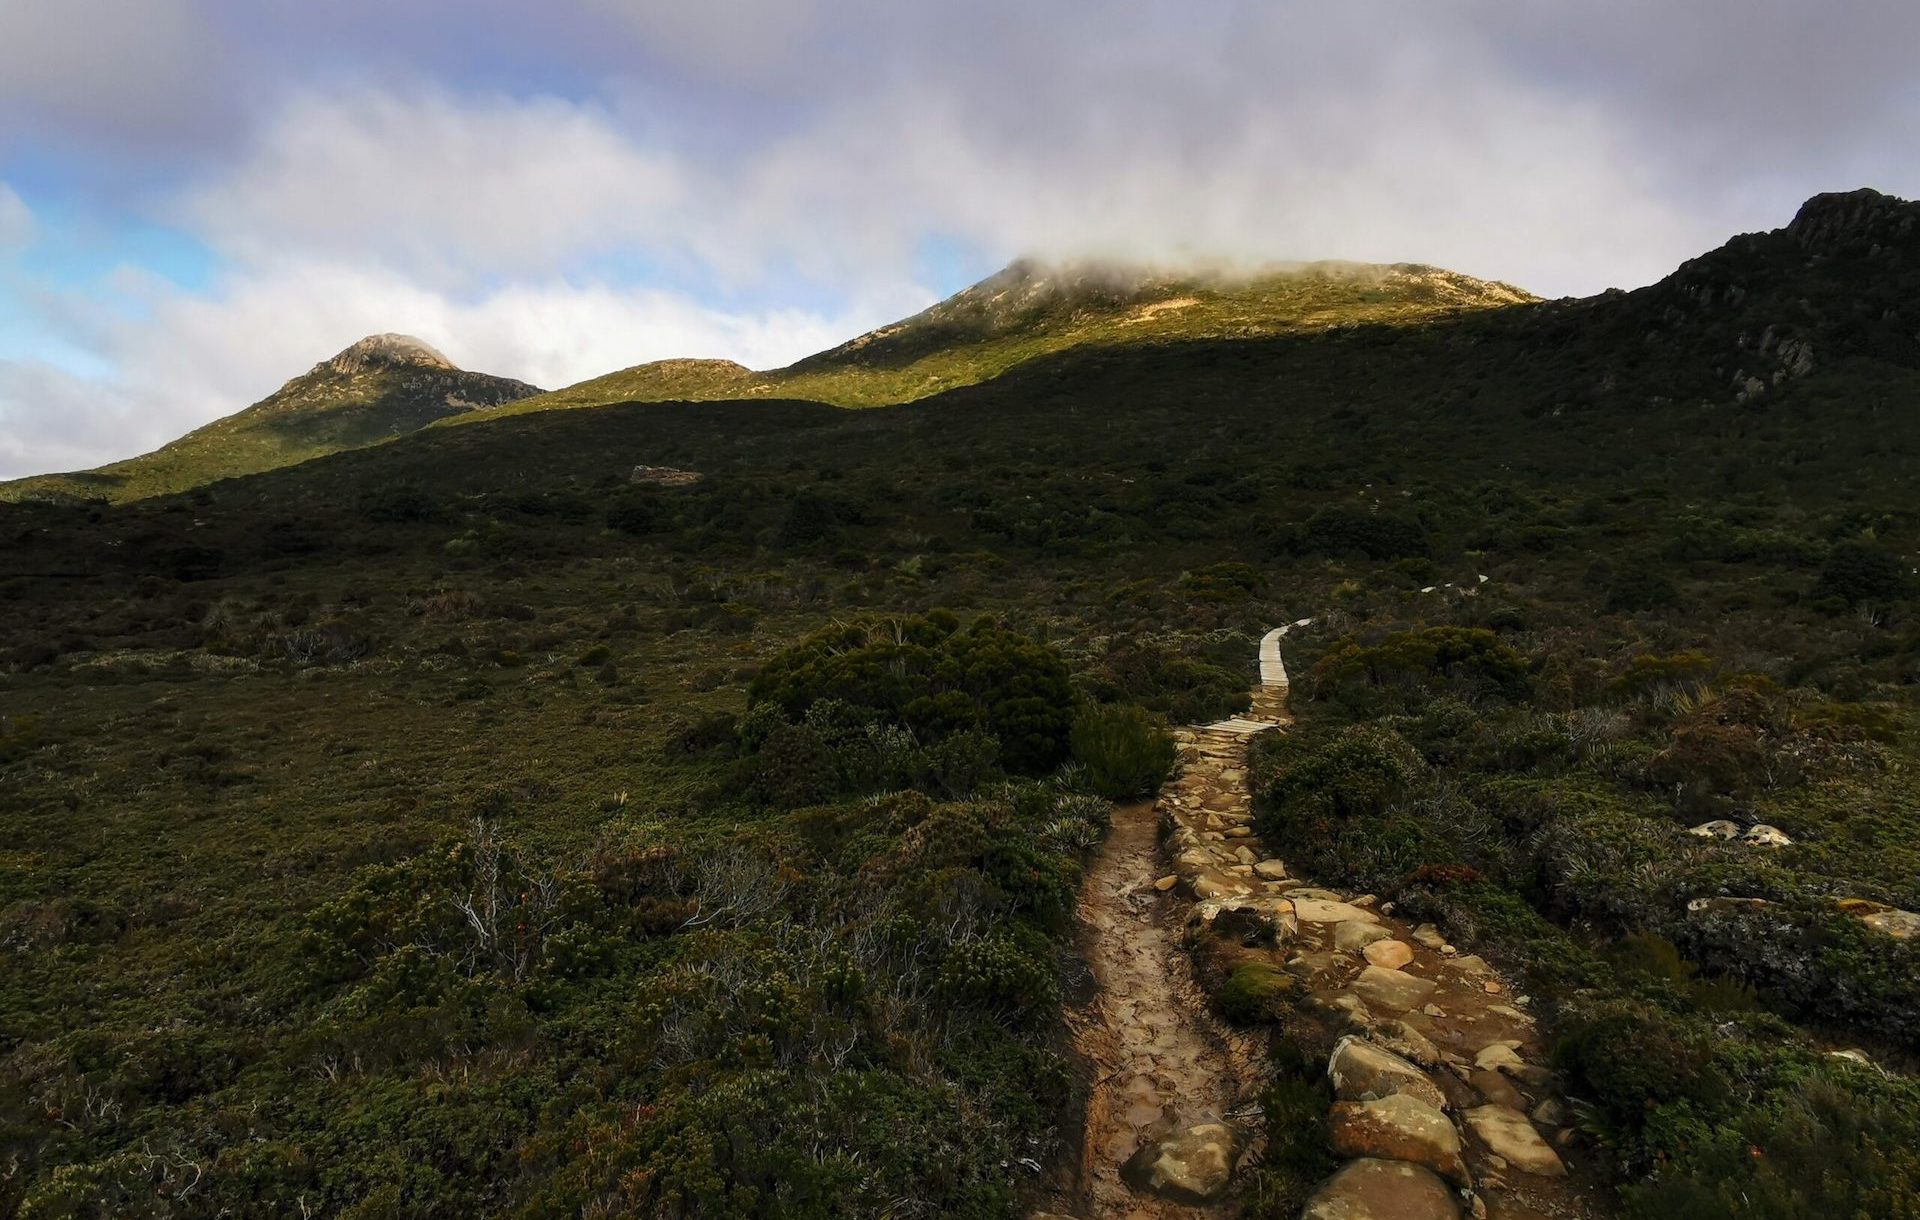 Lanscape photo of a mountain behind low-hanging clouds. A rocky path in the foreground resembles a lizard's tail.